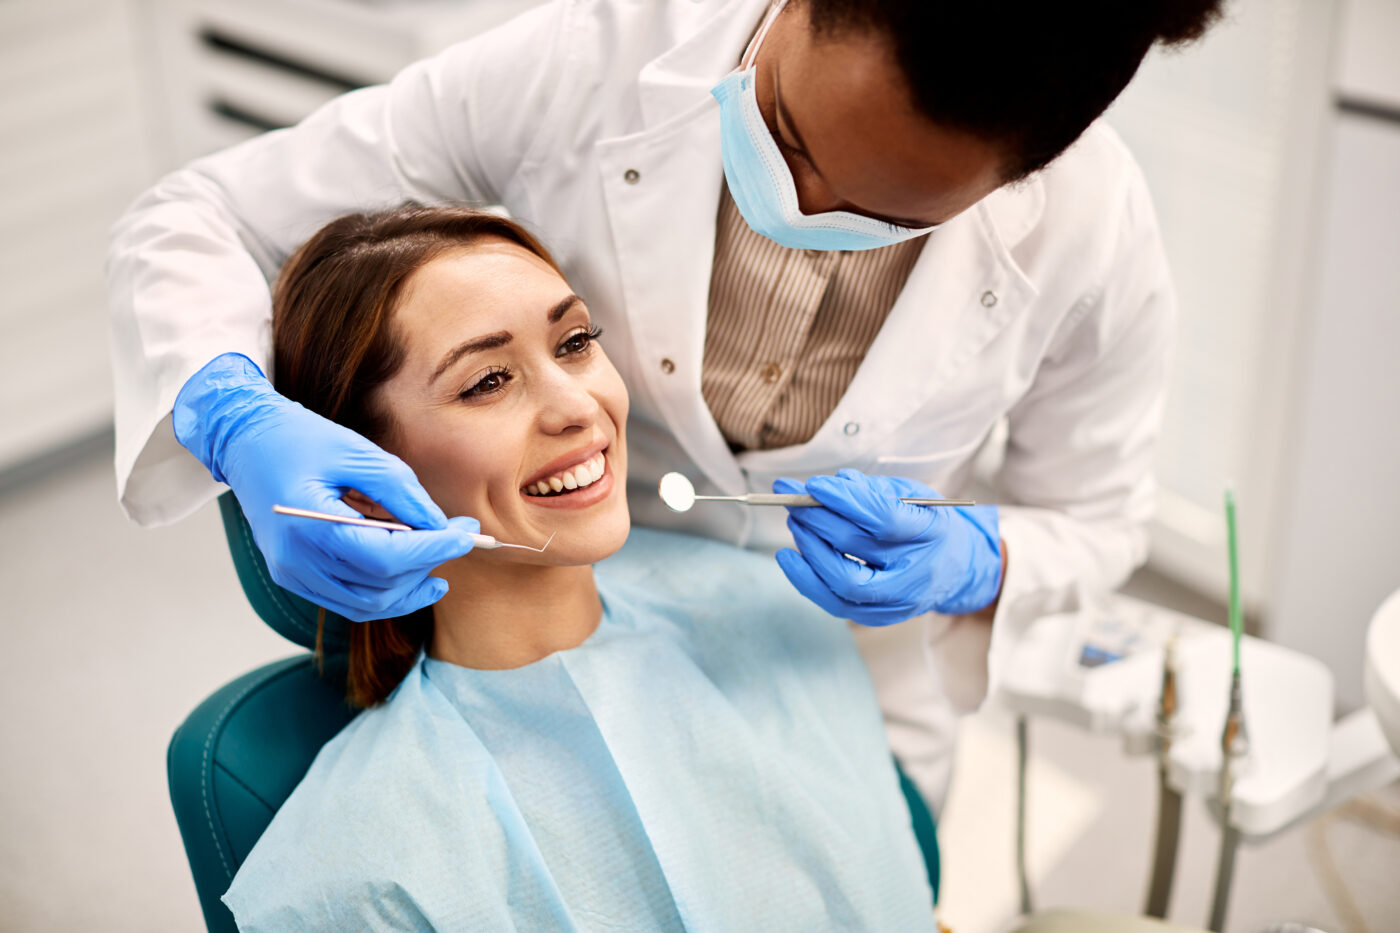 How To Kickstart Your Career If You’re Interested In Dentistry